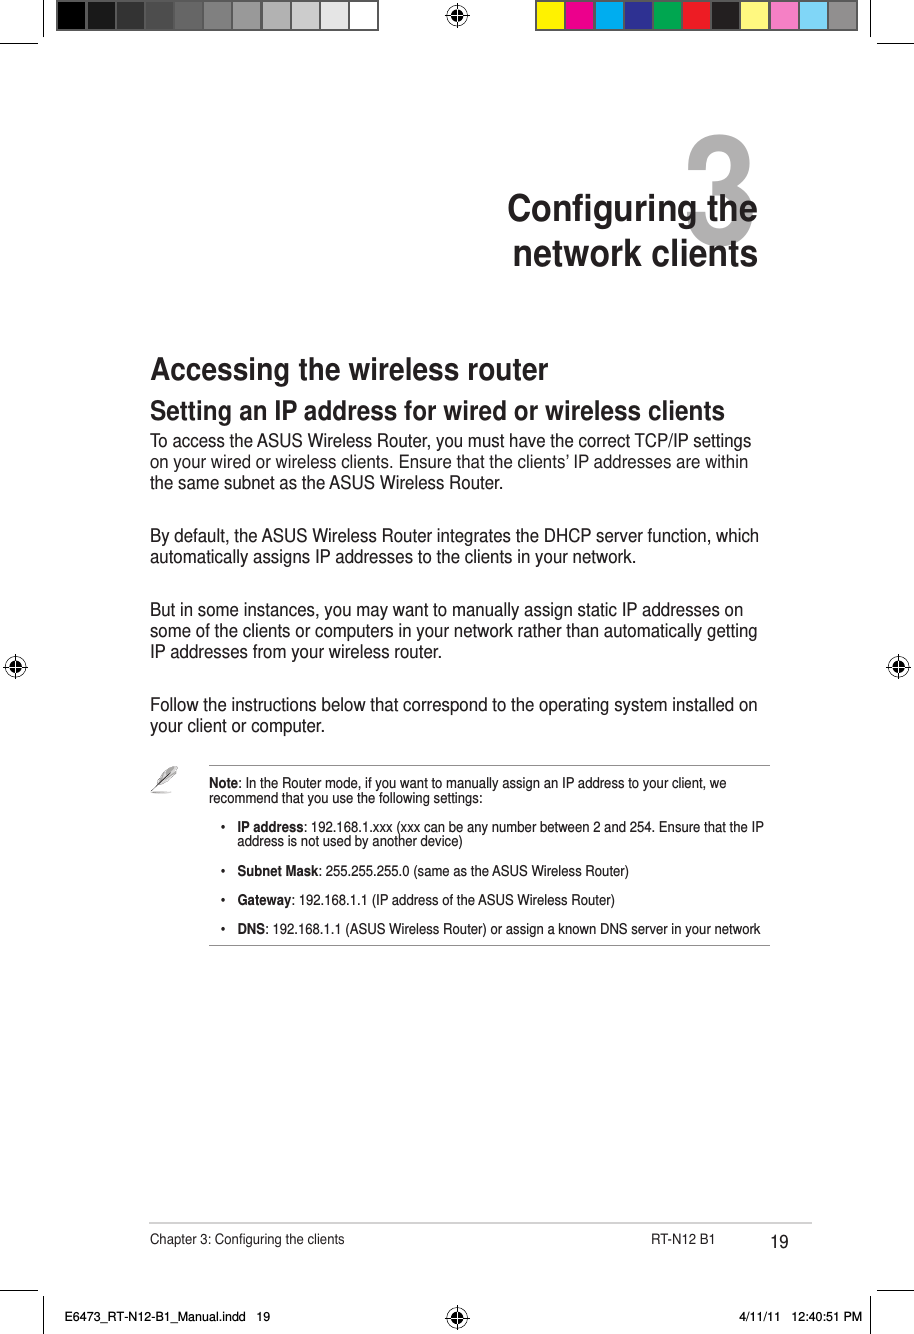 19Chapter 3: Conguring the clients                      RT-N12 B13Conguring the  network clientsAccessing the wireless routerSetting an IP address for wired or wireless clientsTo access the ASUS Wireless Router, you must have the correct TCP/IP settings on your wired or wireless clients. Ensure that the clients’ IP addresses are within the same subnet as the ASUS Wireless Router.By default, the ASUS Wireless Router integrates the DHCP server function, which automatically assigns IP addresses to the clients in your network.But in some instances, you may want to manually assign static IP addresses on some of the clients or computers in your network rather than automatically getting IP addresses from your wireless router.Follow the instructions below that correspond to the operating system installed on your client or computer.Note: In the Router mode, if you want to manually assign an IP address to your client, we recommend that you use the following settings:    •  IP address: 192.168.1.xxx (xxx can be any number between 2 and 254. Ensure that the IP      address is not used by another device)    •  Subnet Mask: 255.255.255.0 (same as the ASUS Wireless Router)    •  Gateway: 192.168.1.1 (IP address of the ASUS Wireless Router)    •  DNS: 192.168.1.1 (ASUS Wireless Router) or assign a known DNS server in your networkE6473_RT-N12-B1_Manual.indd   19 4/11/11   12:40:51 PM